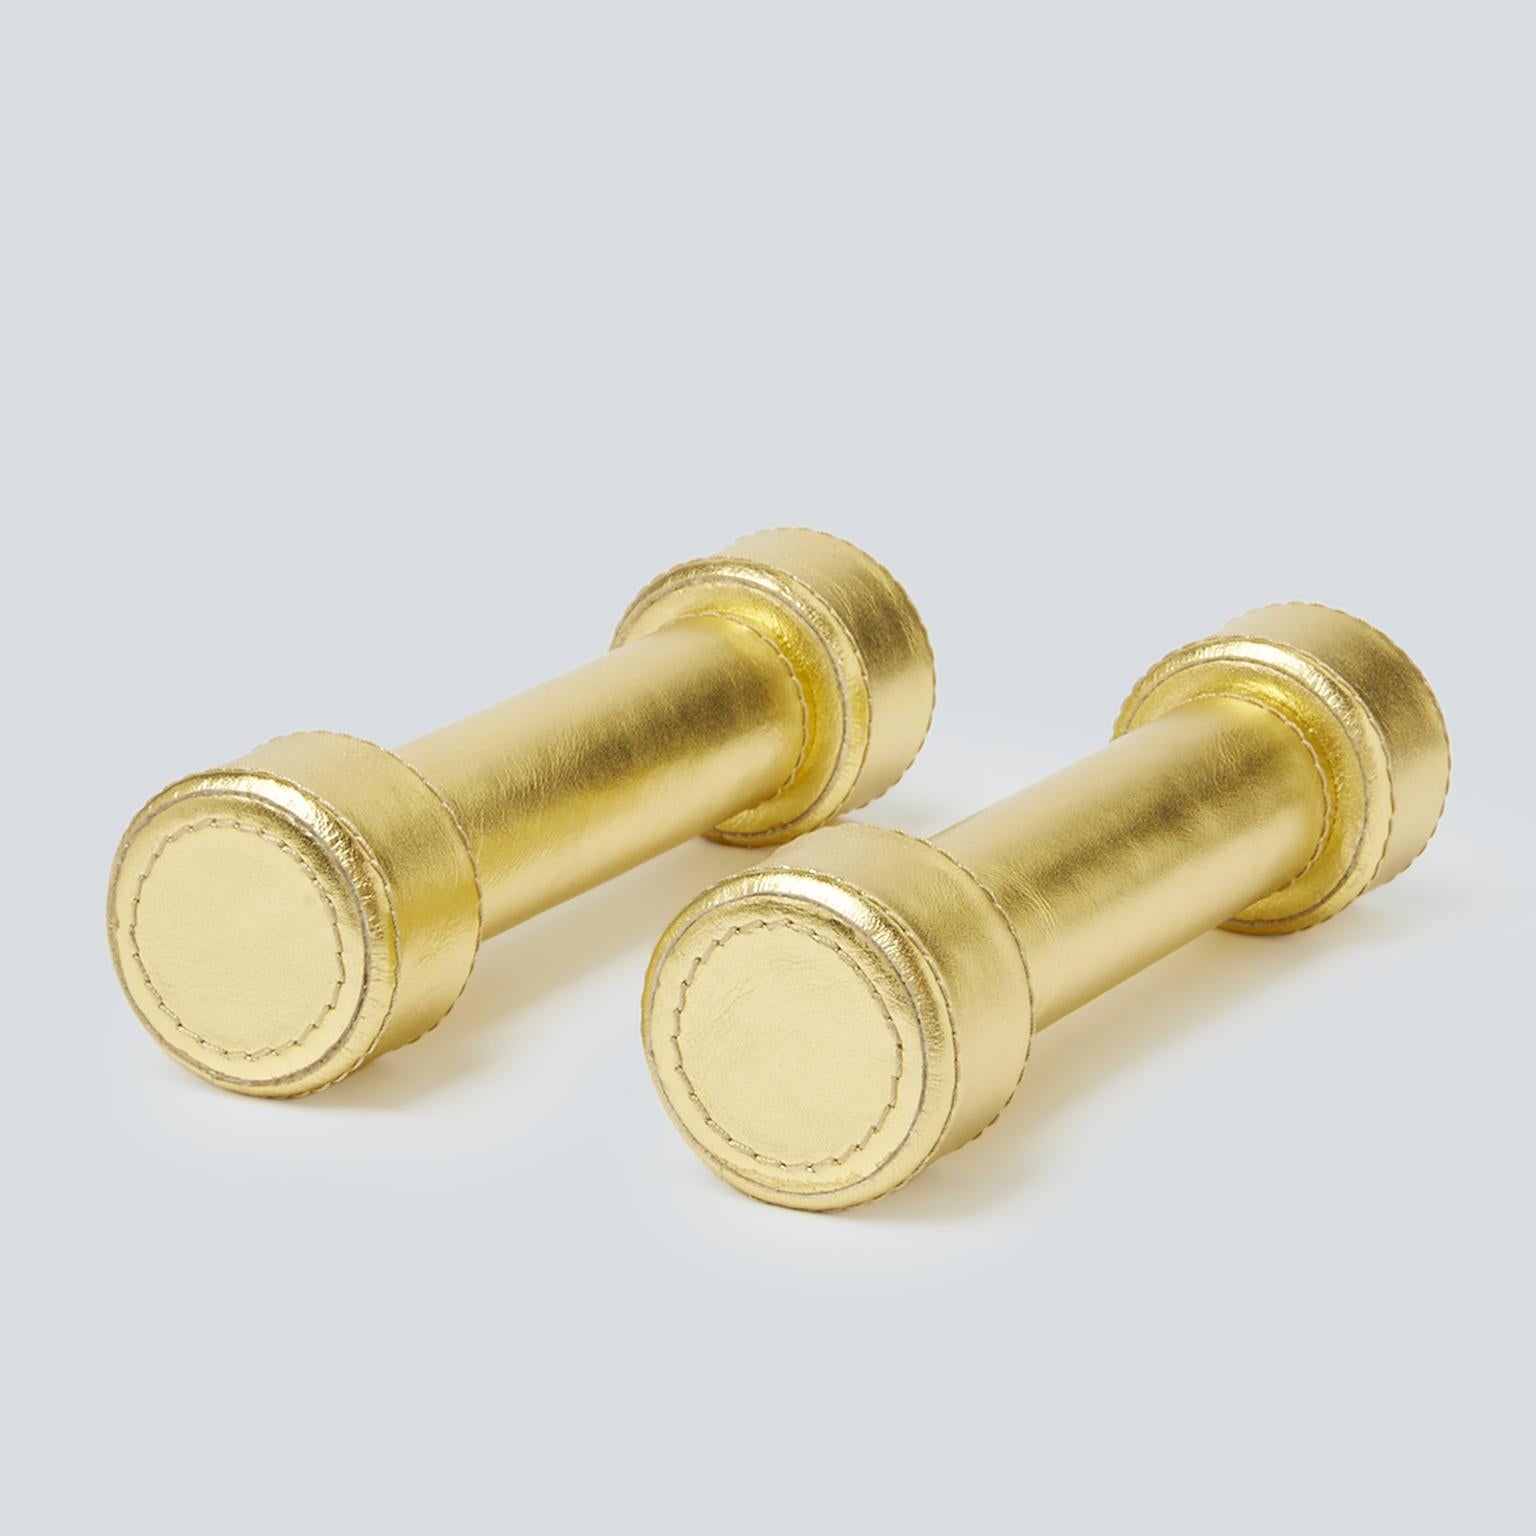 Italian Dumbbell Set in Stainless Steel Covered in Gold Leather, Atelier Biagetti